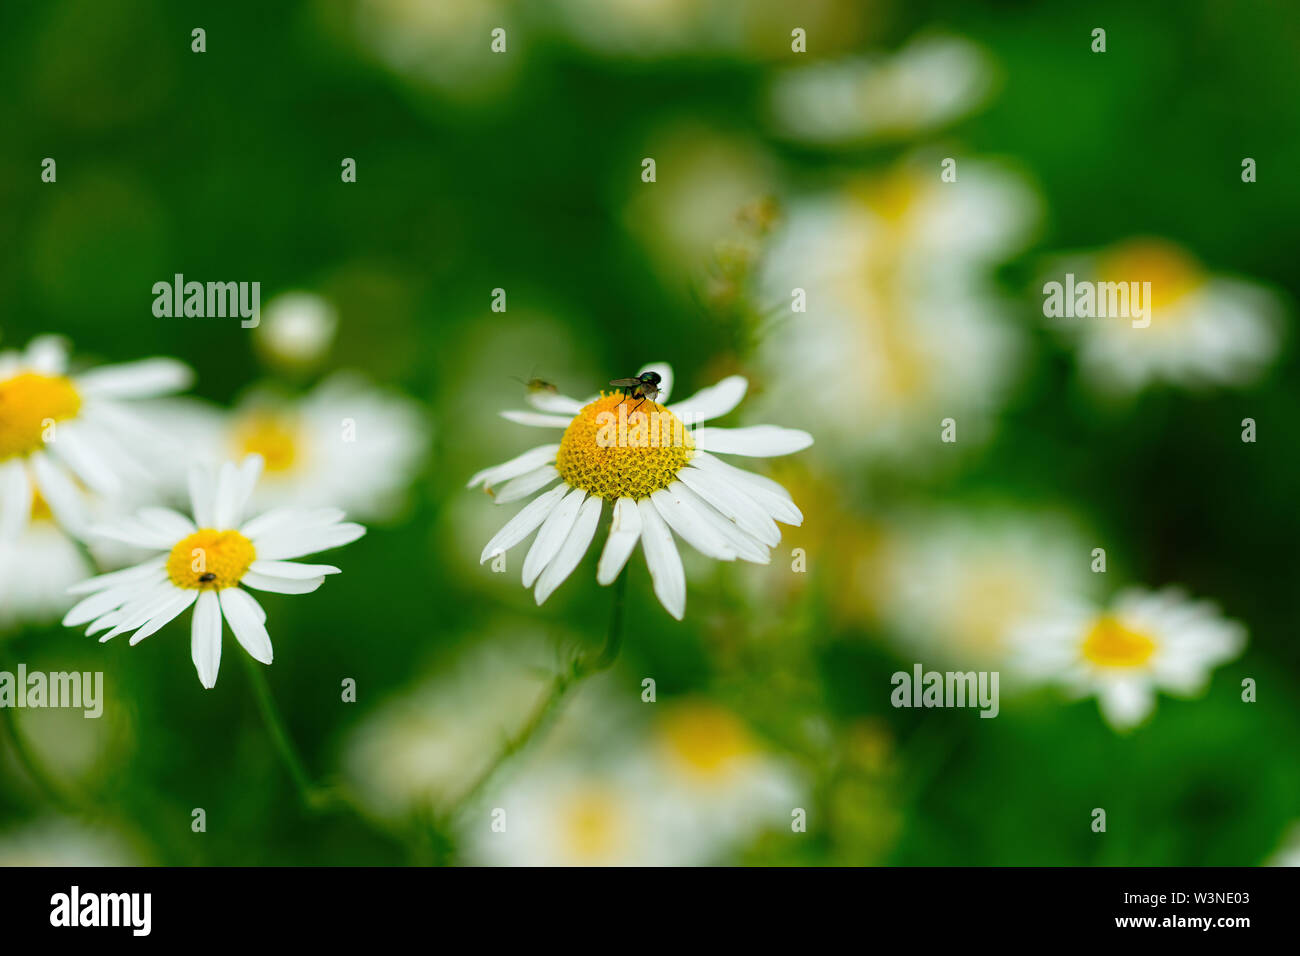 Small green fly insect sits on white and yellow daisy flower, Bellis perennis. Green grass around and in the background. Happy days of summer Stock Photo